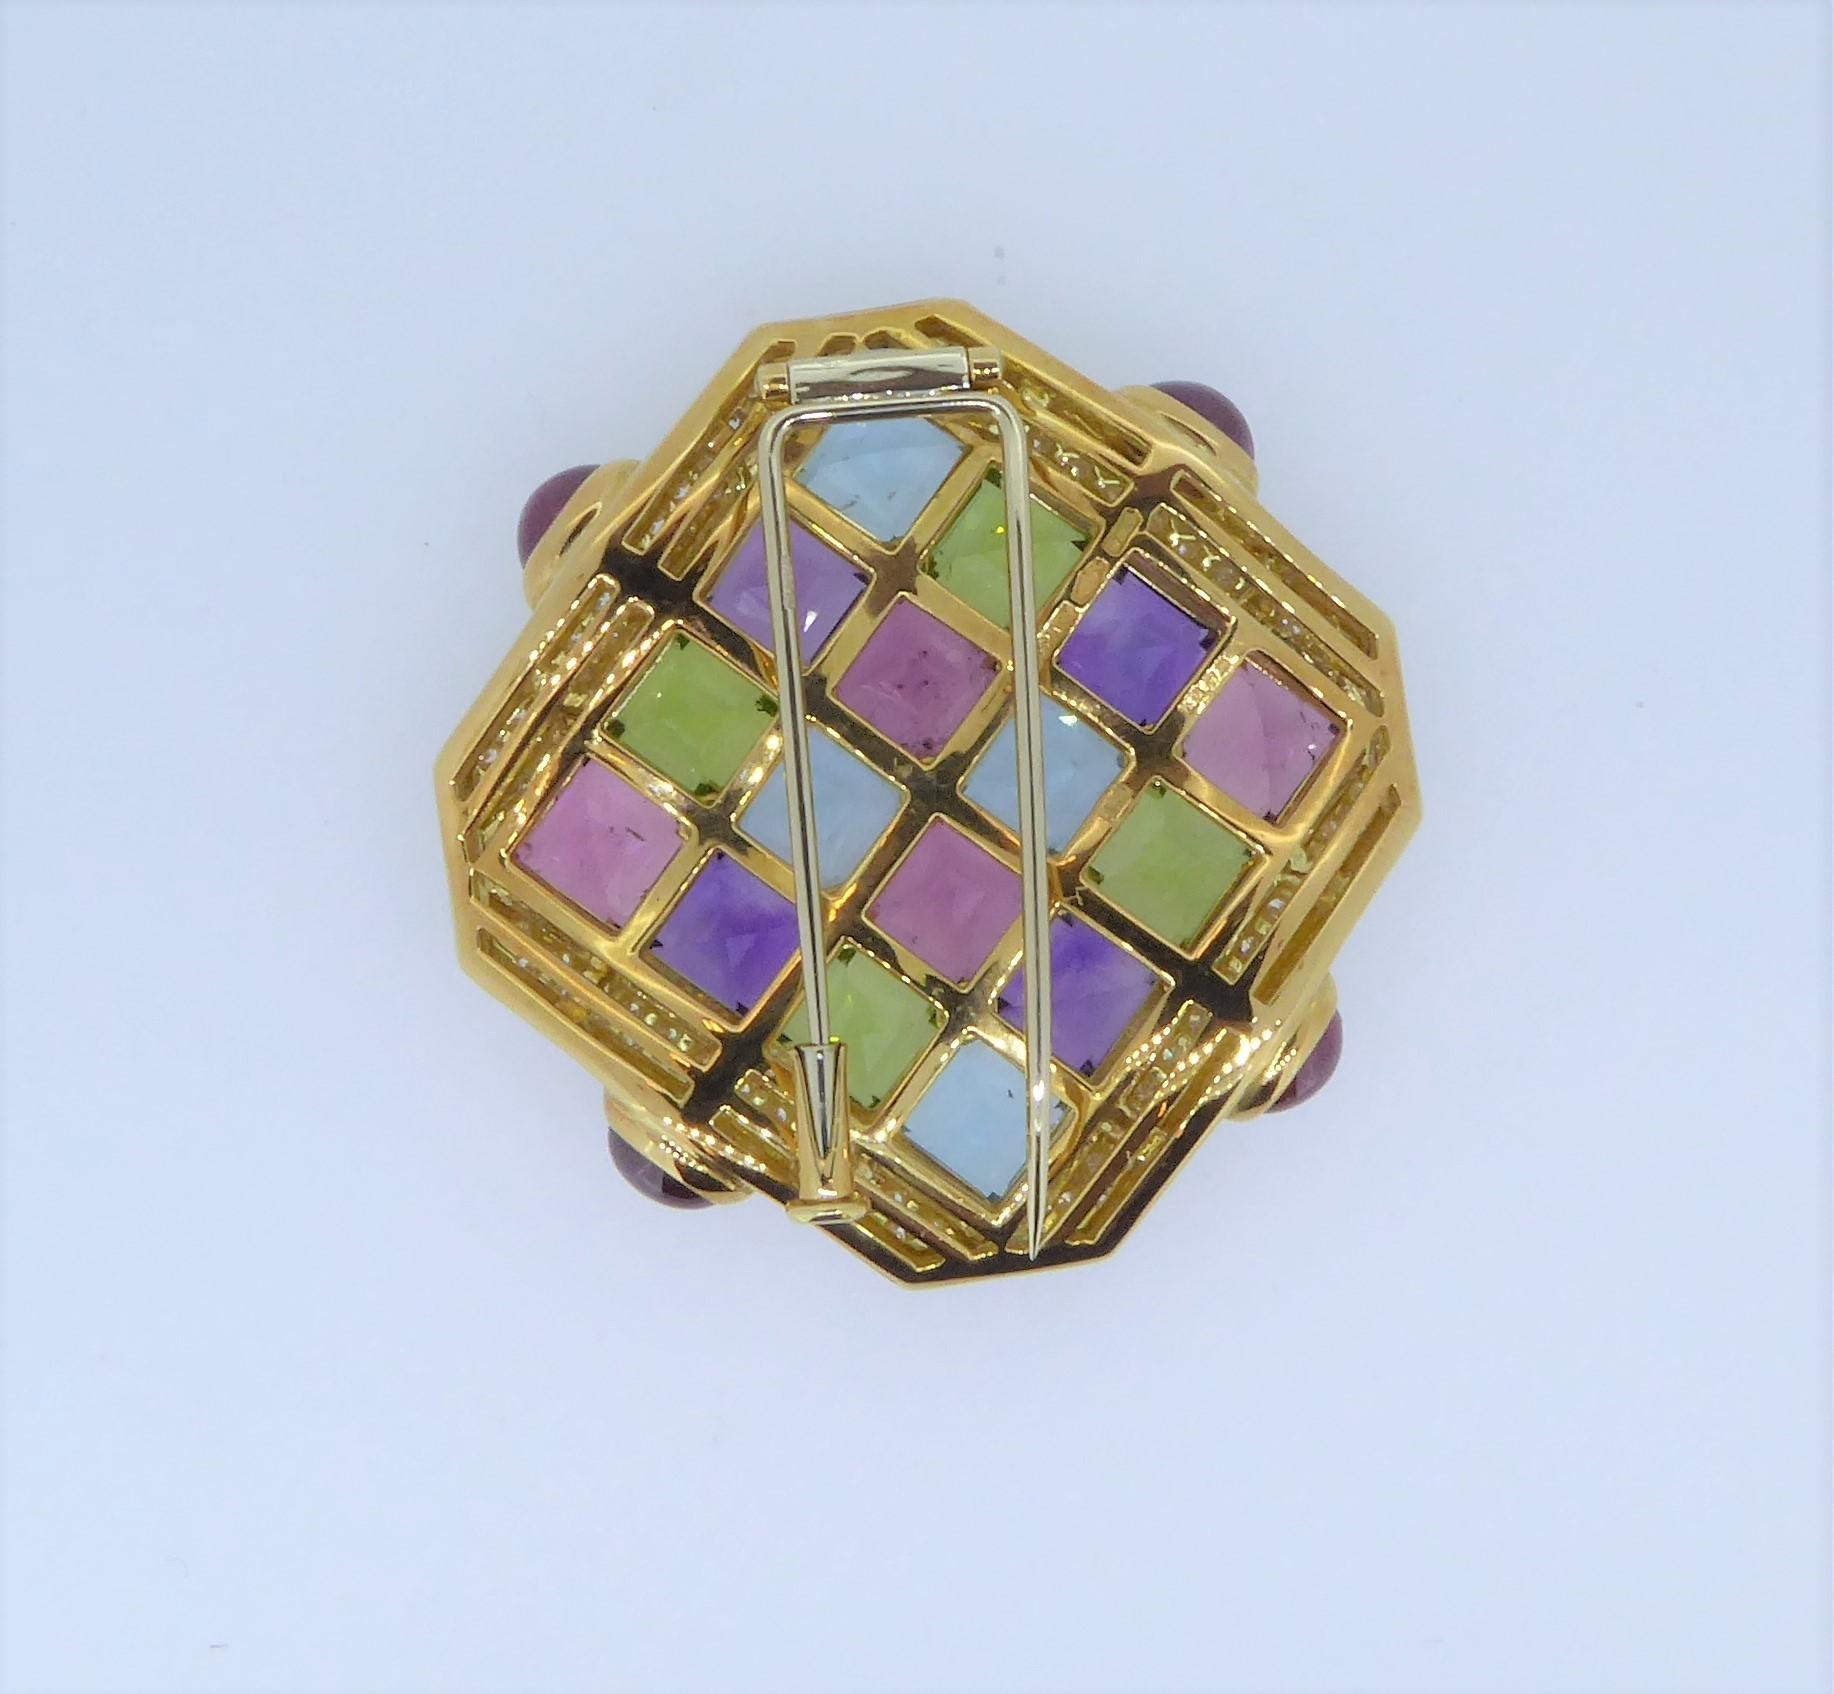 A Bulgari 18 Carat Yellow Gold Multi-Gem And Diamond Carré Brooch. 
The square shaped brooch adorned with amethyst, topaz, citrine and tourmalines within a diamond border. Signed 'Bulgari' '750' and numbered. Weighs approximately 37.4 grams and